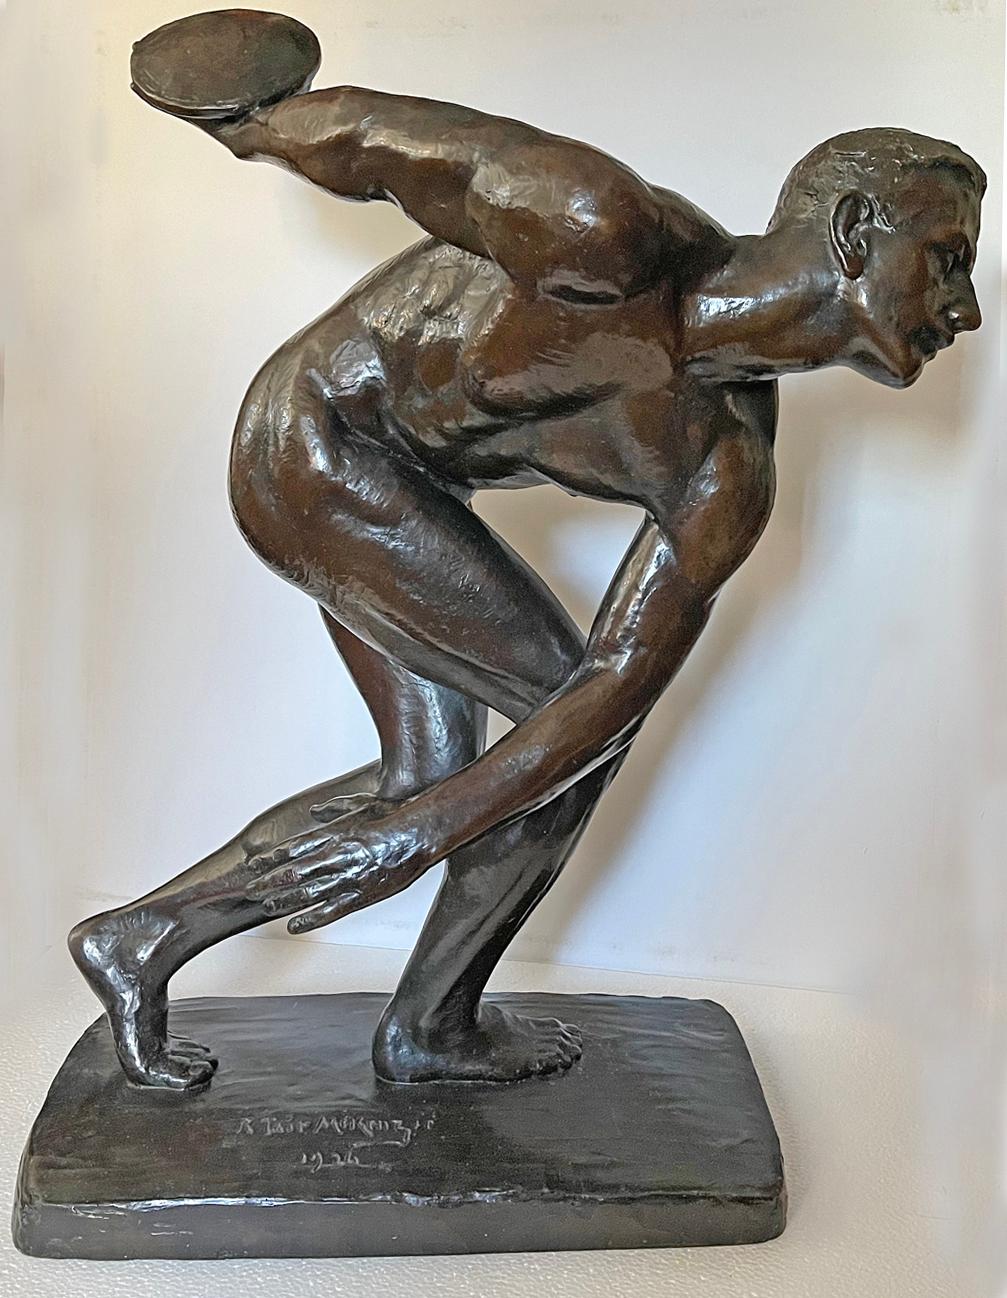 Sculpted by America’s foremost artist with a focus on the form and performance of male athletes, this masterpiece of 20th century sculpture -- especially large and rare -- depicts a nude discus thrower as he is about to hurl the disc forward. Robert